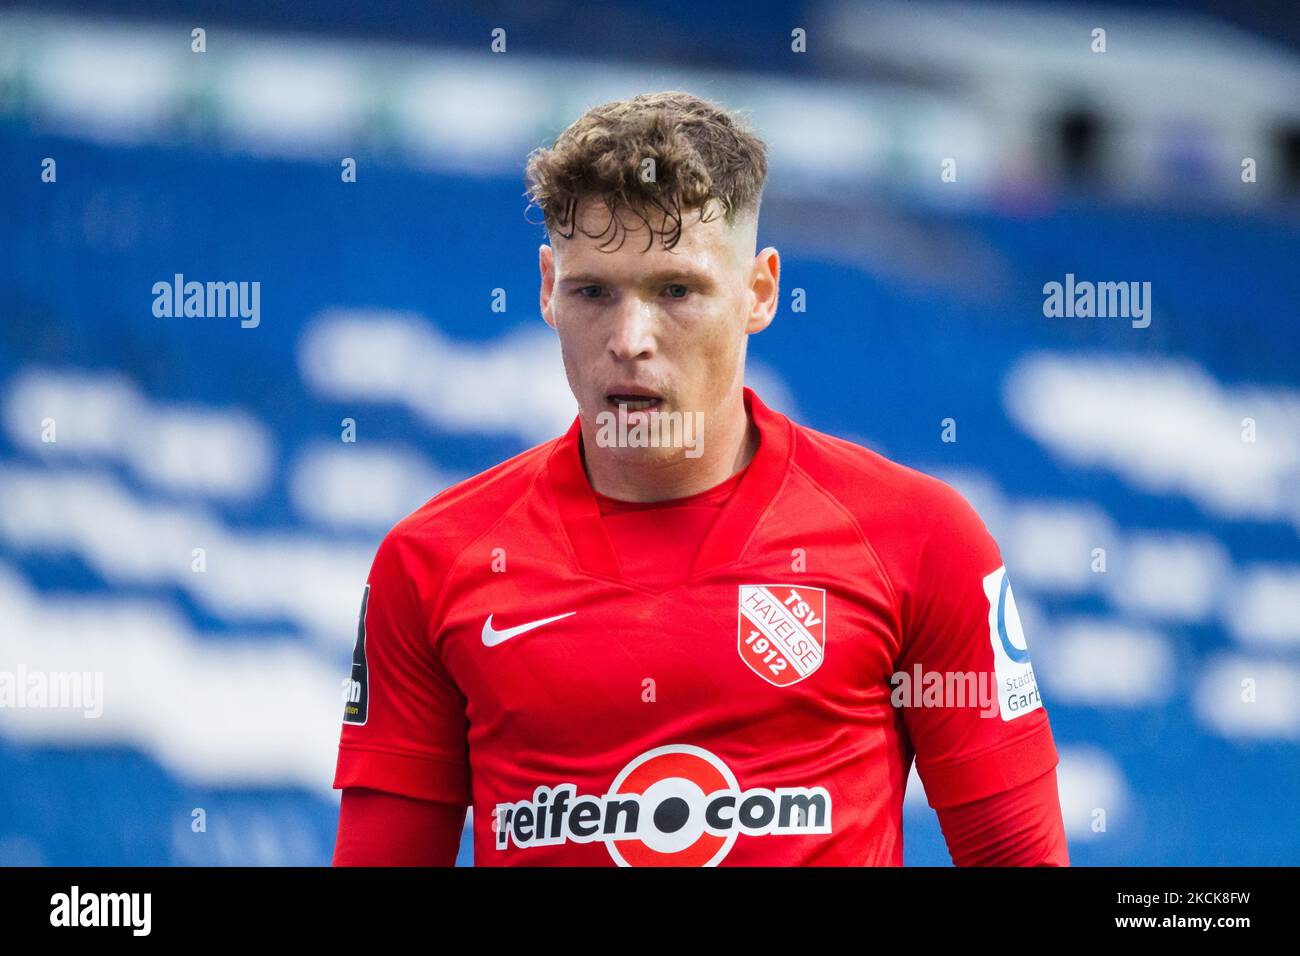 Florian Riedel of havelse looks on during the 3. Liga match between TSV Havelse and Tuerkguecue Muenchen at HDI-Arena on August 25, 2021 in Hanover, Germany. (Photo by Peter Niedung/NurPhoto) Stock Photo